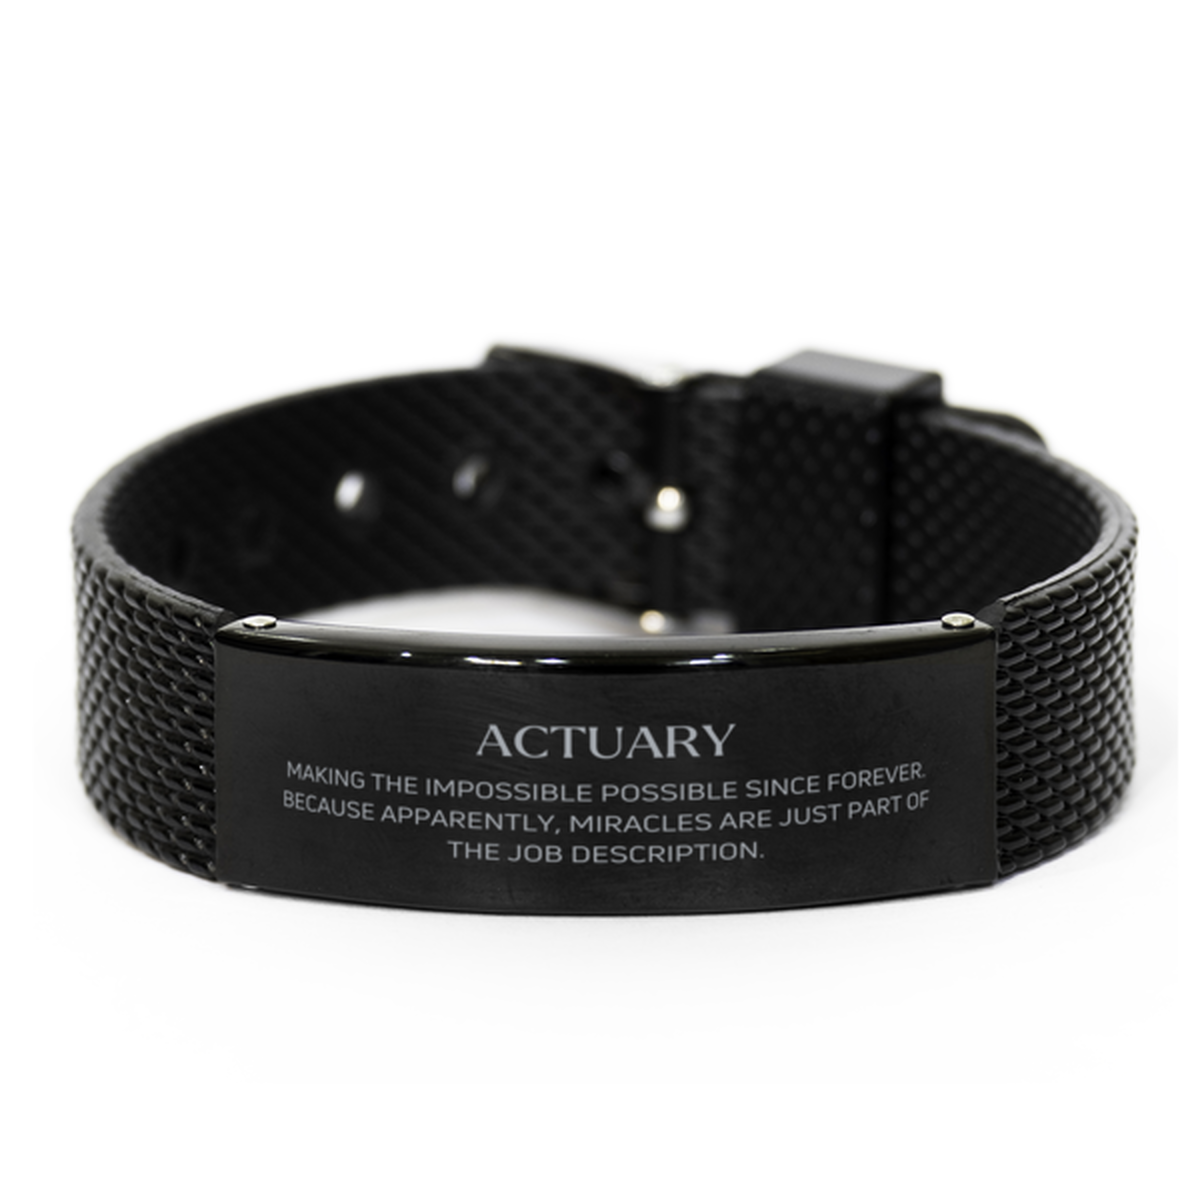 Funny Actuary Gifts, Miracles are just part of the job description, Inspirational Birthday Black Shark Mesh Bracelet For Actuary, Men, Women, Coworkers, Friends, Boss